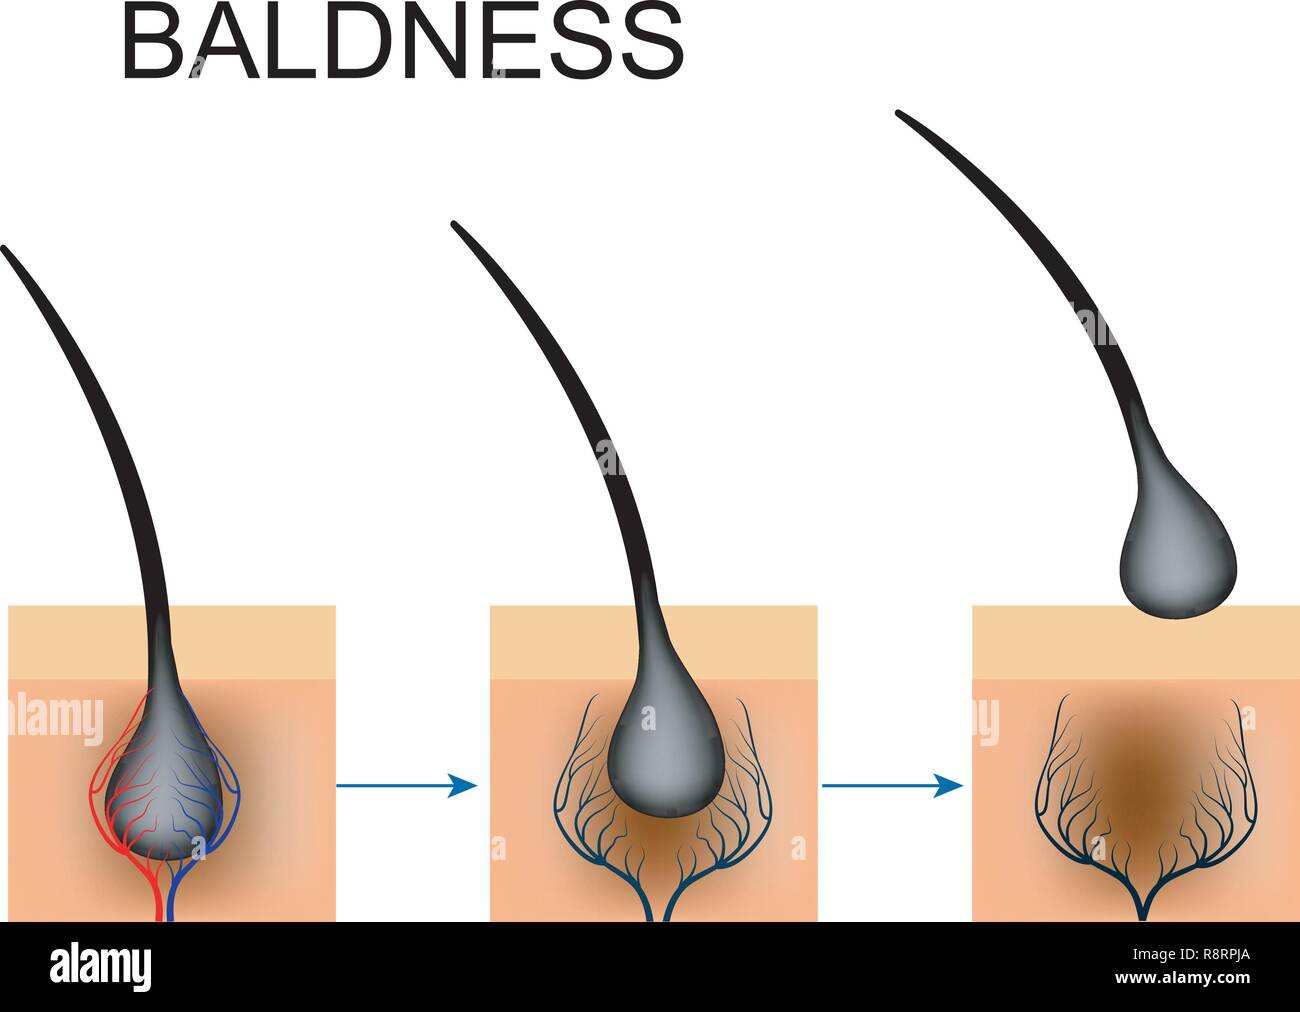 vector illustration of circulatory disorders in the hair follicle. baldness Stock Vector